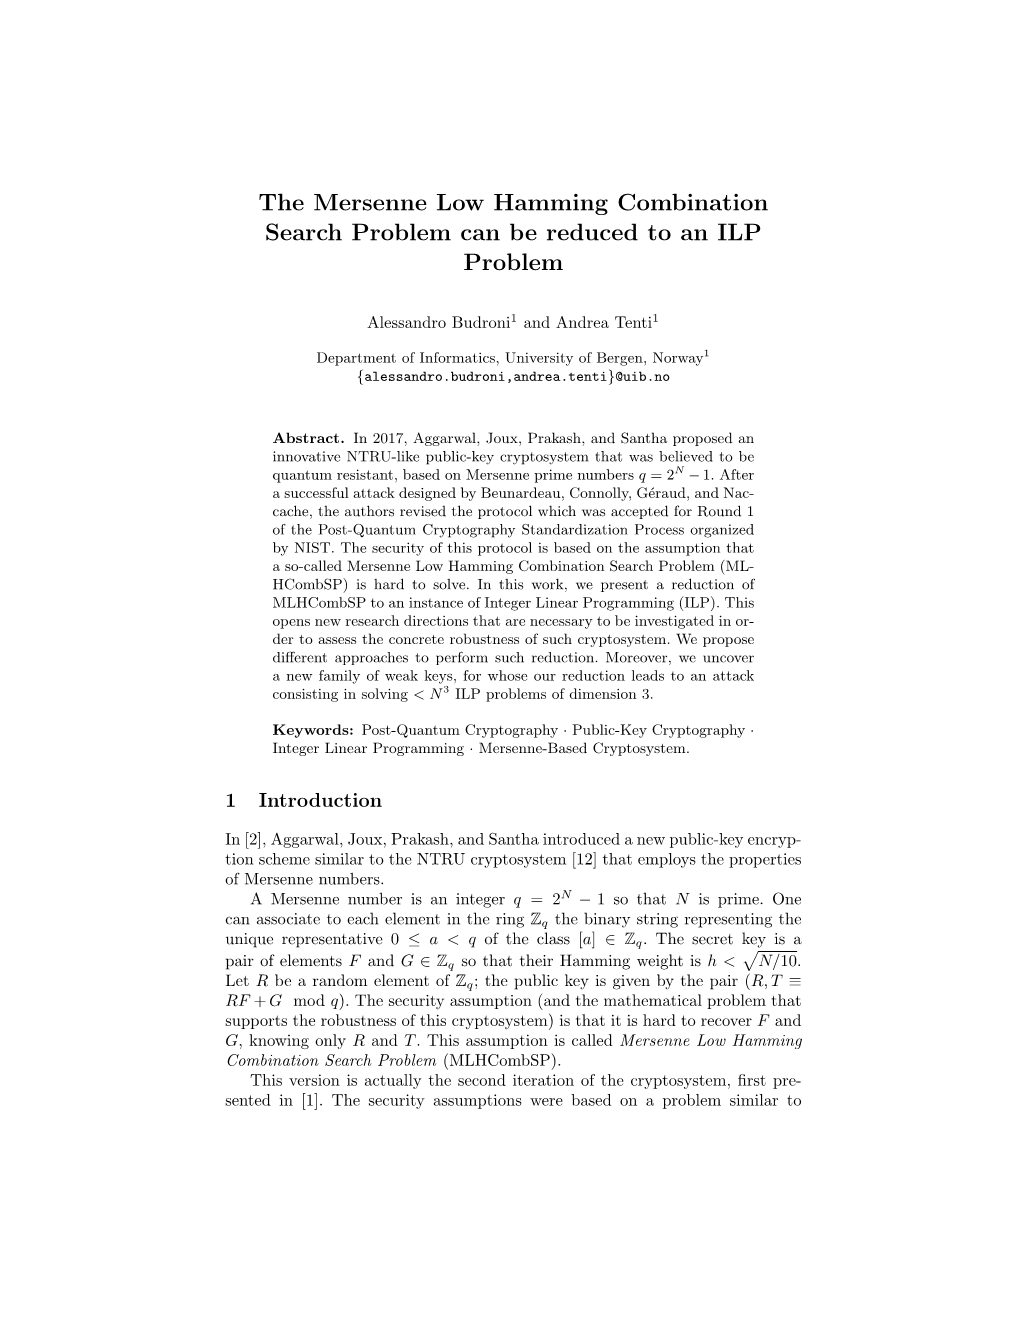 The Mersenne Low Hamming Combination Search Problem Can Be Reduced to an ILP Problem